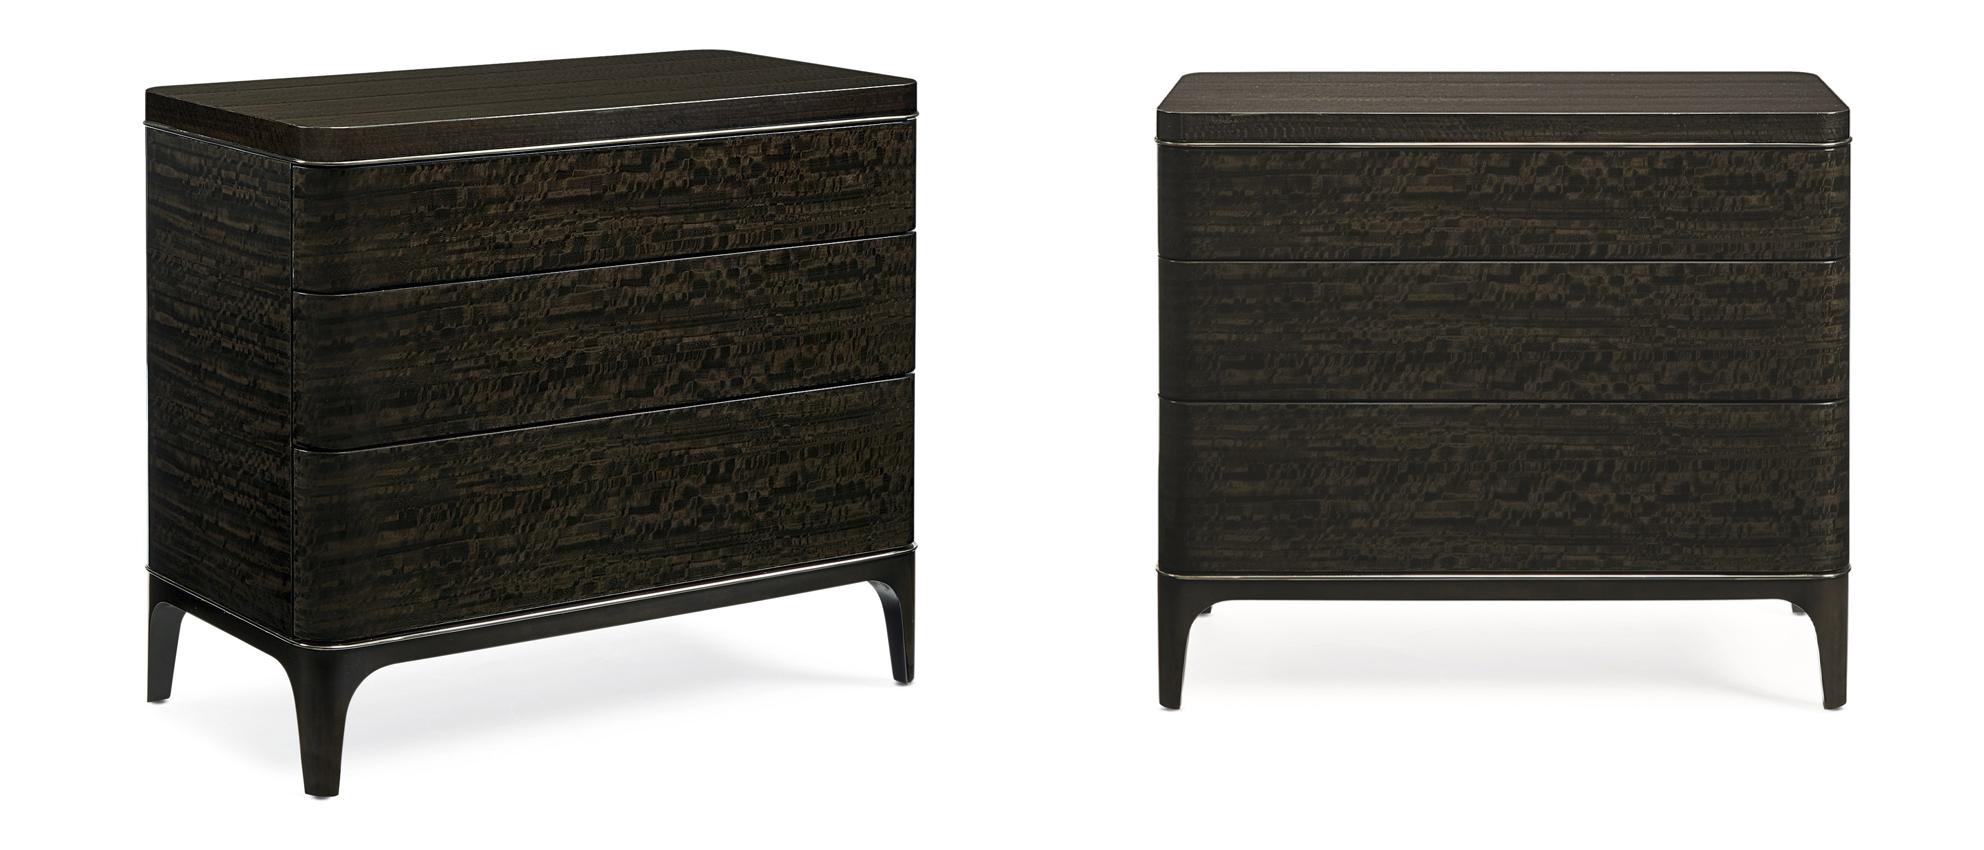 Caracole THE SIMPATICO NIGHTSTAND Nightstand Set